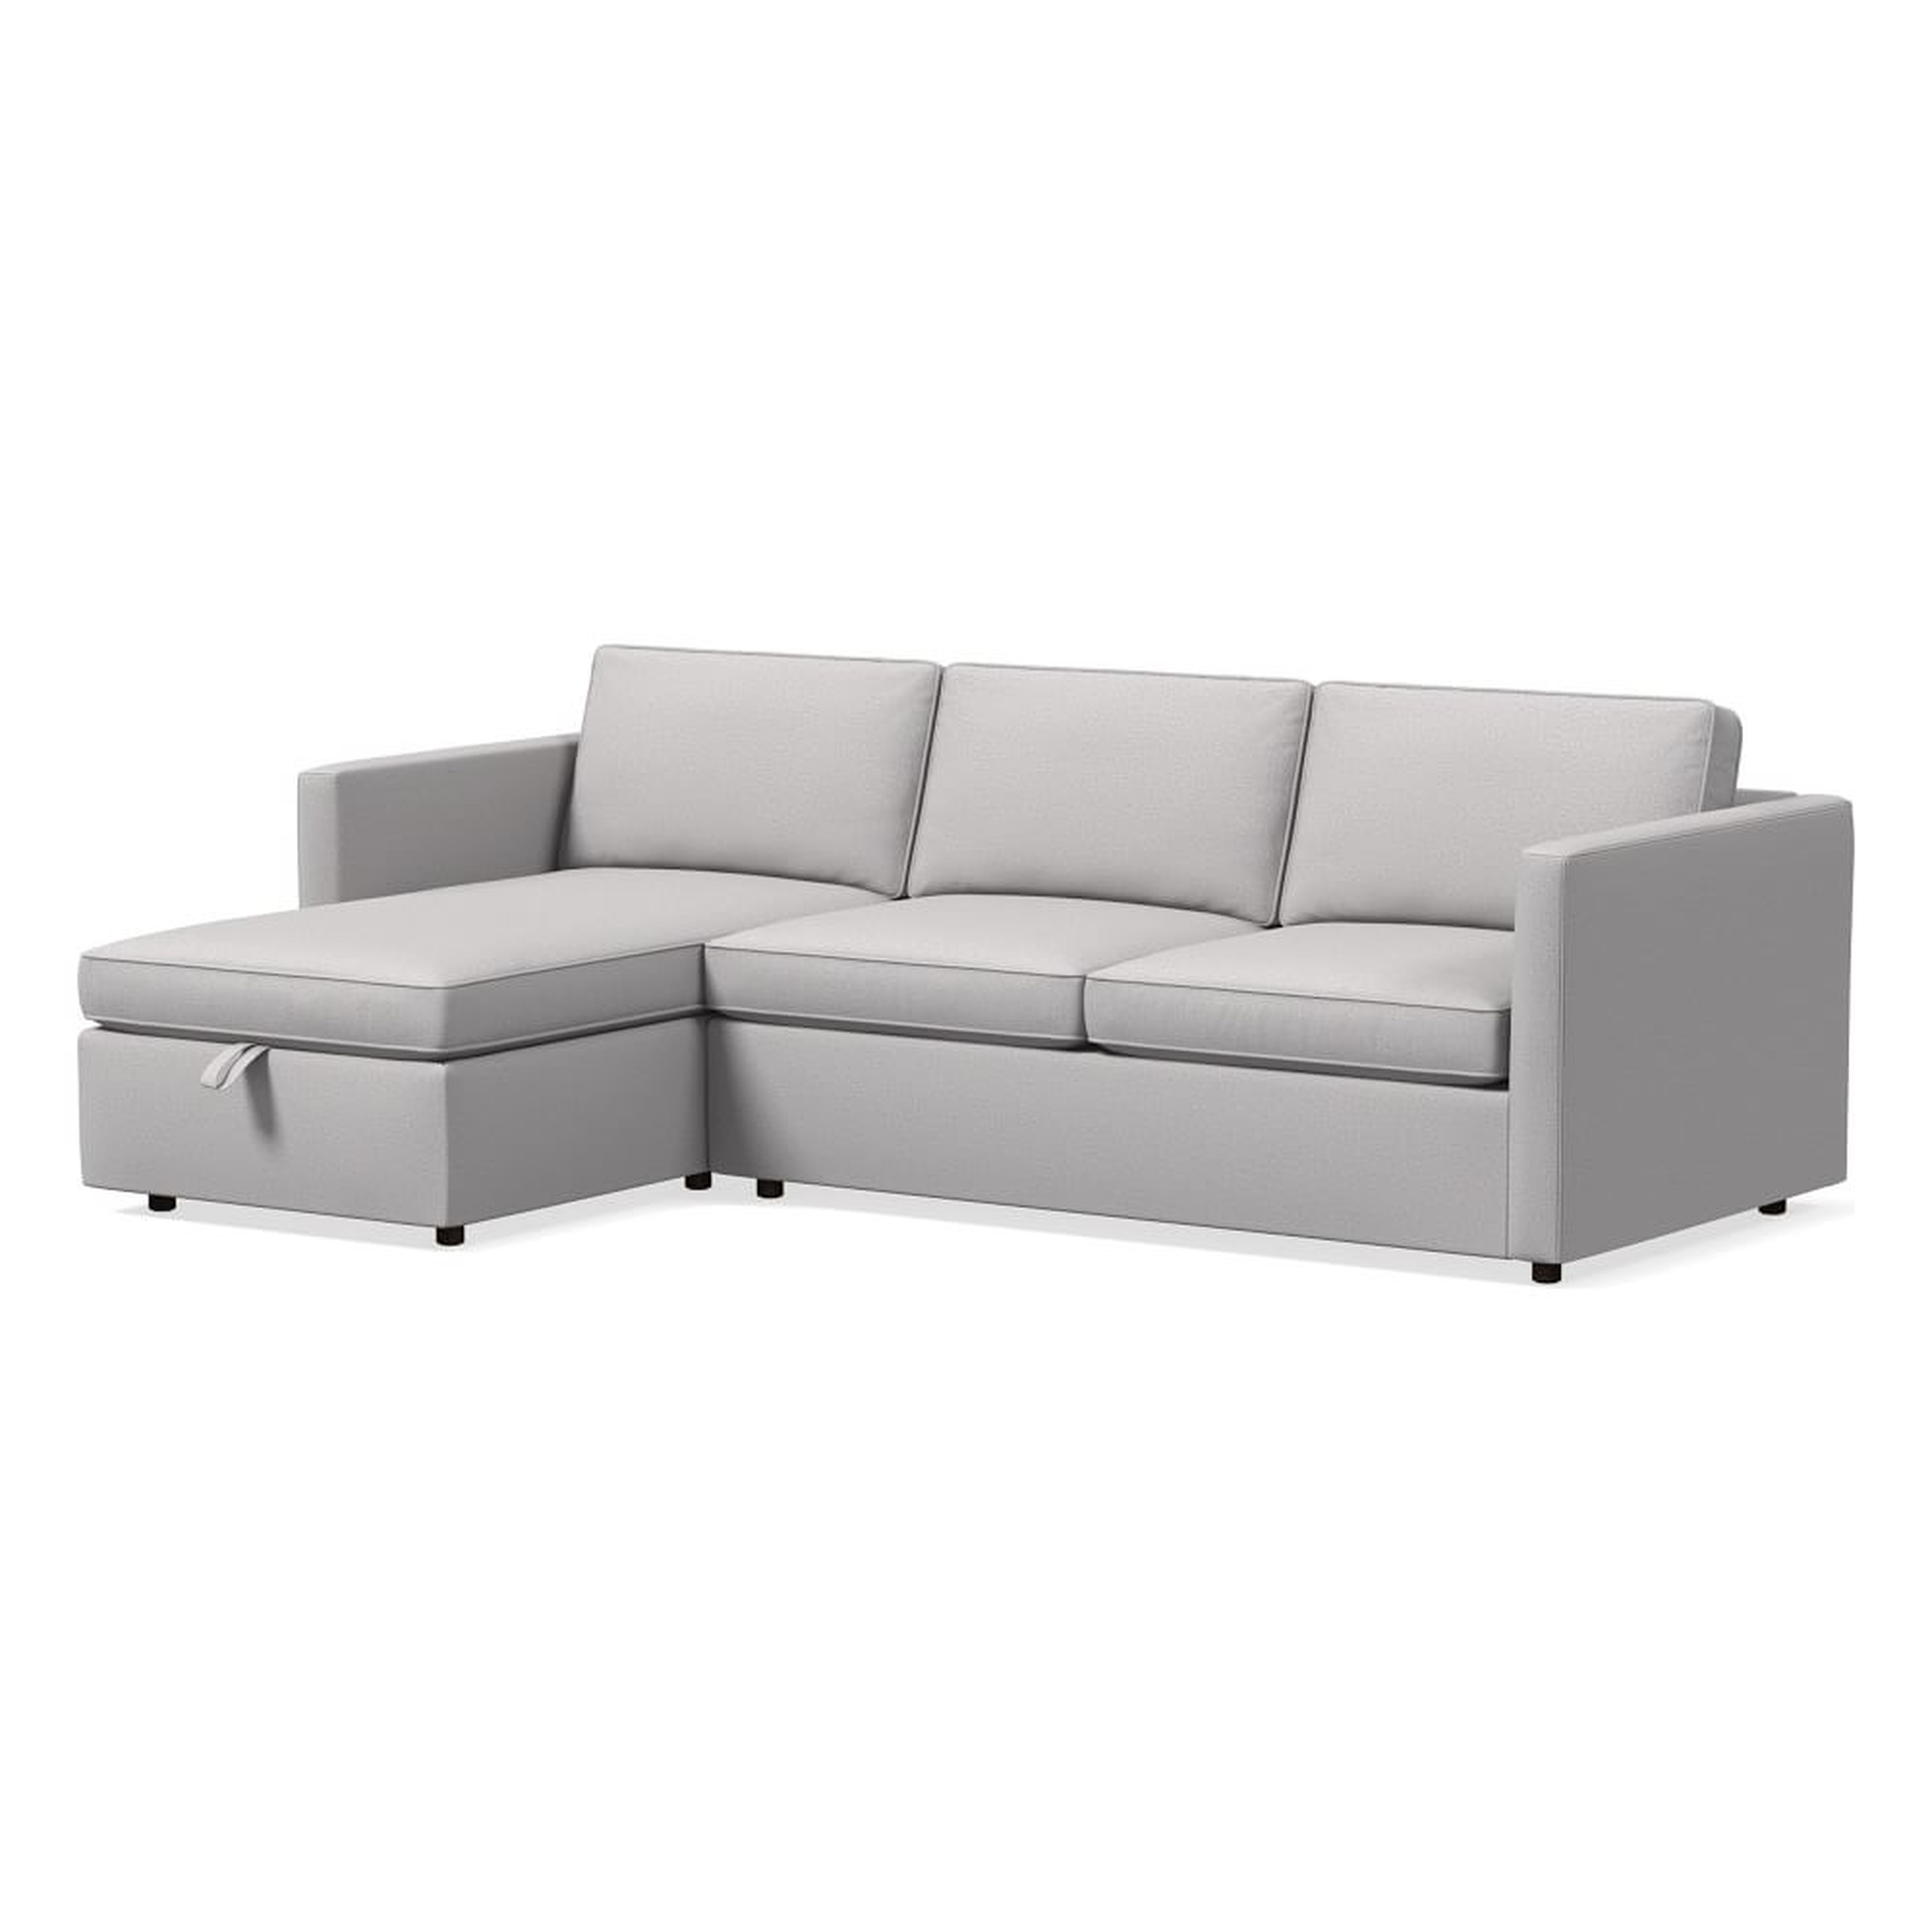 Harris 101" Left Multi Seat 2-Piece Chaise Sectional w/ Storage, Standard Depth, Chenille Tweed, Frost Gray - West Elm